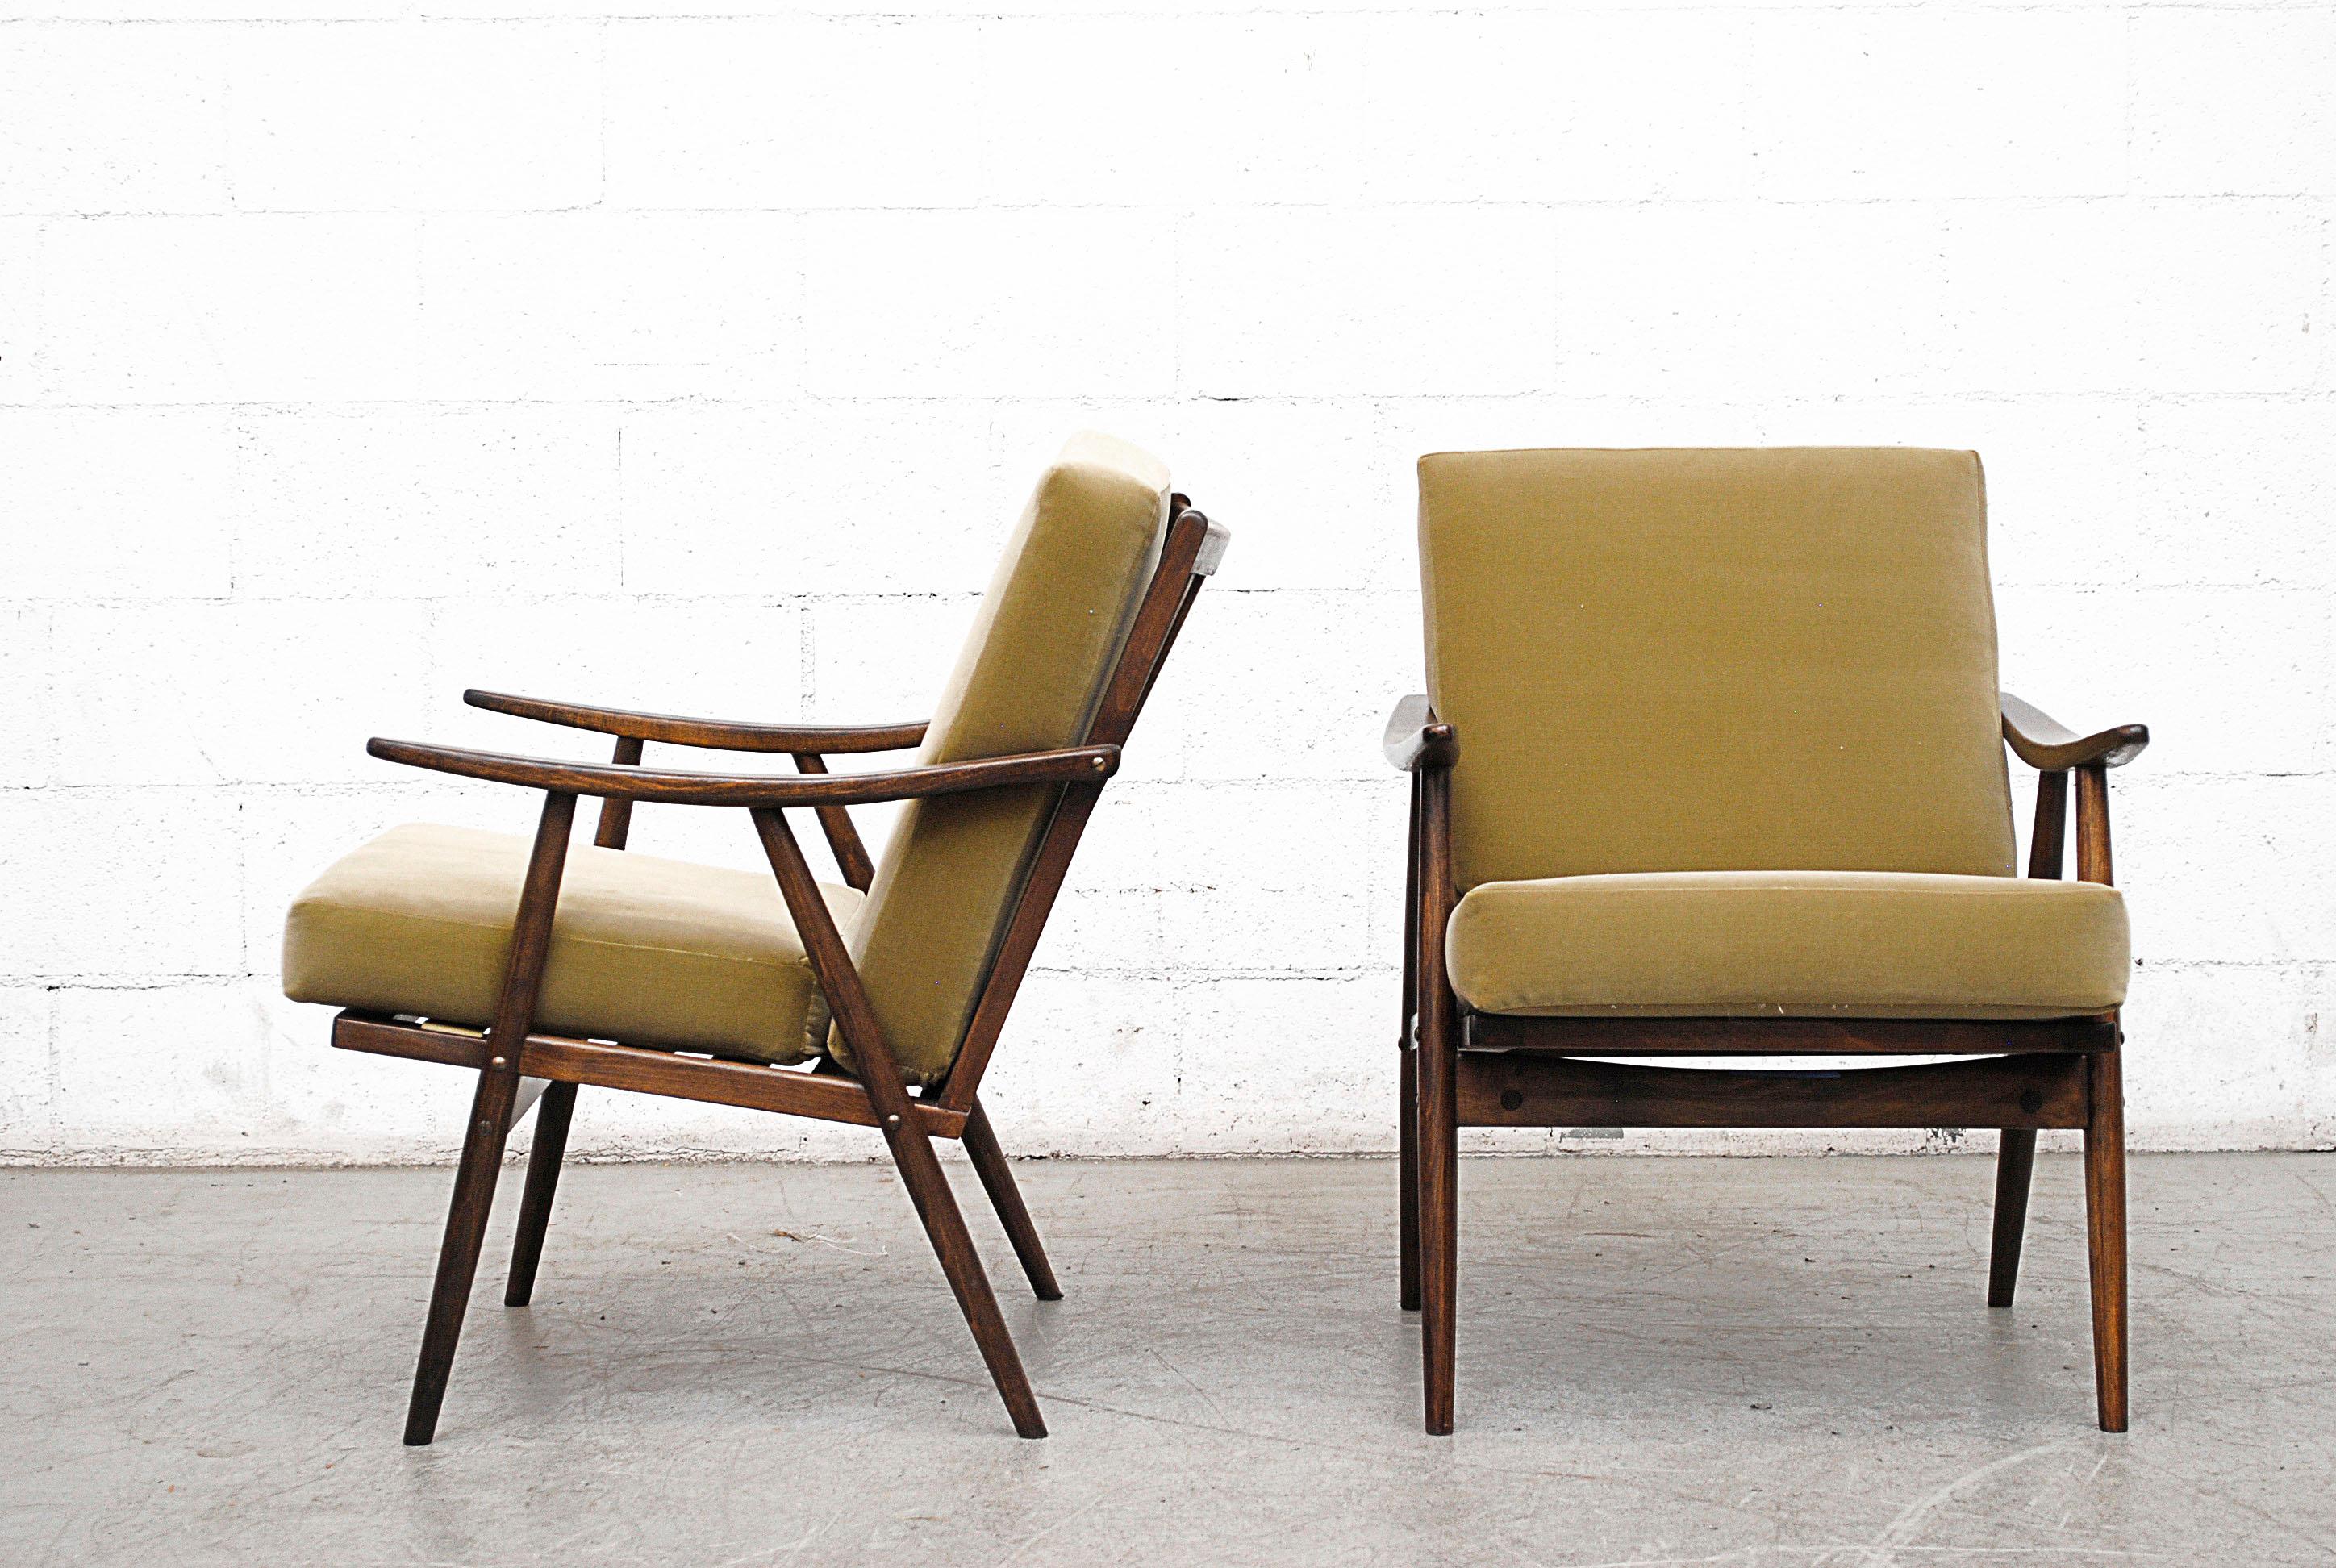 Set of two matching midcentury lounge chairs, newly upholstered in leaf green velvet. Lightly refinished dark wood frames with organically carved armrests.